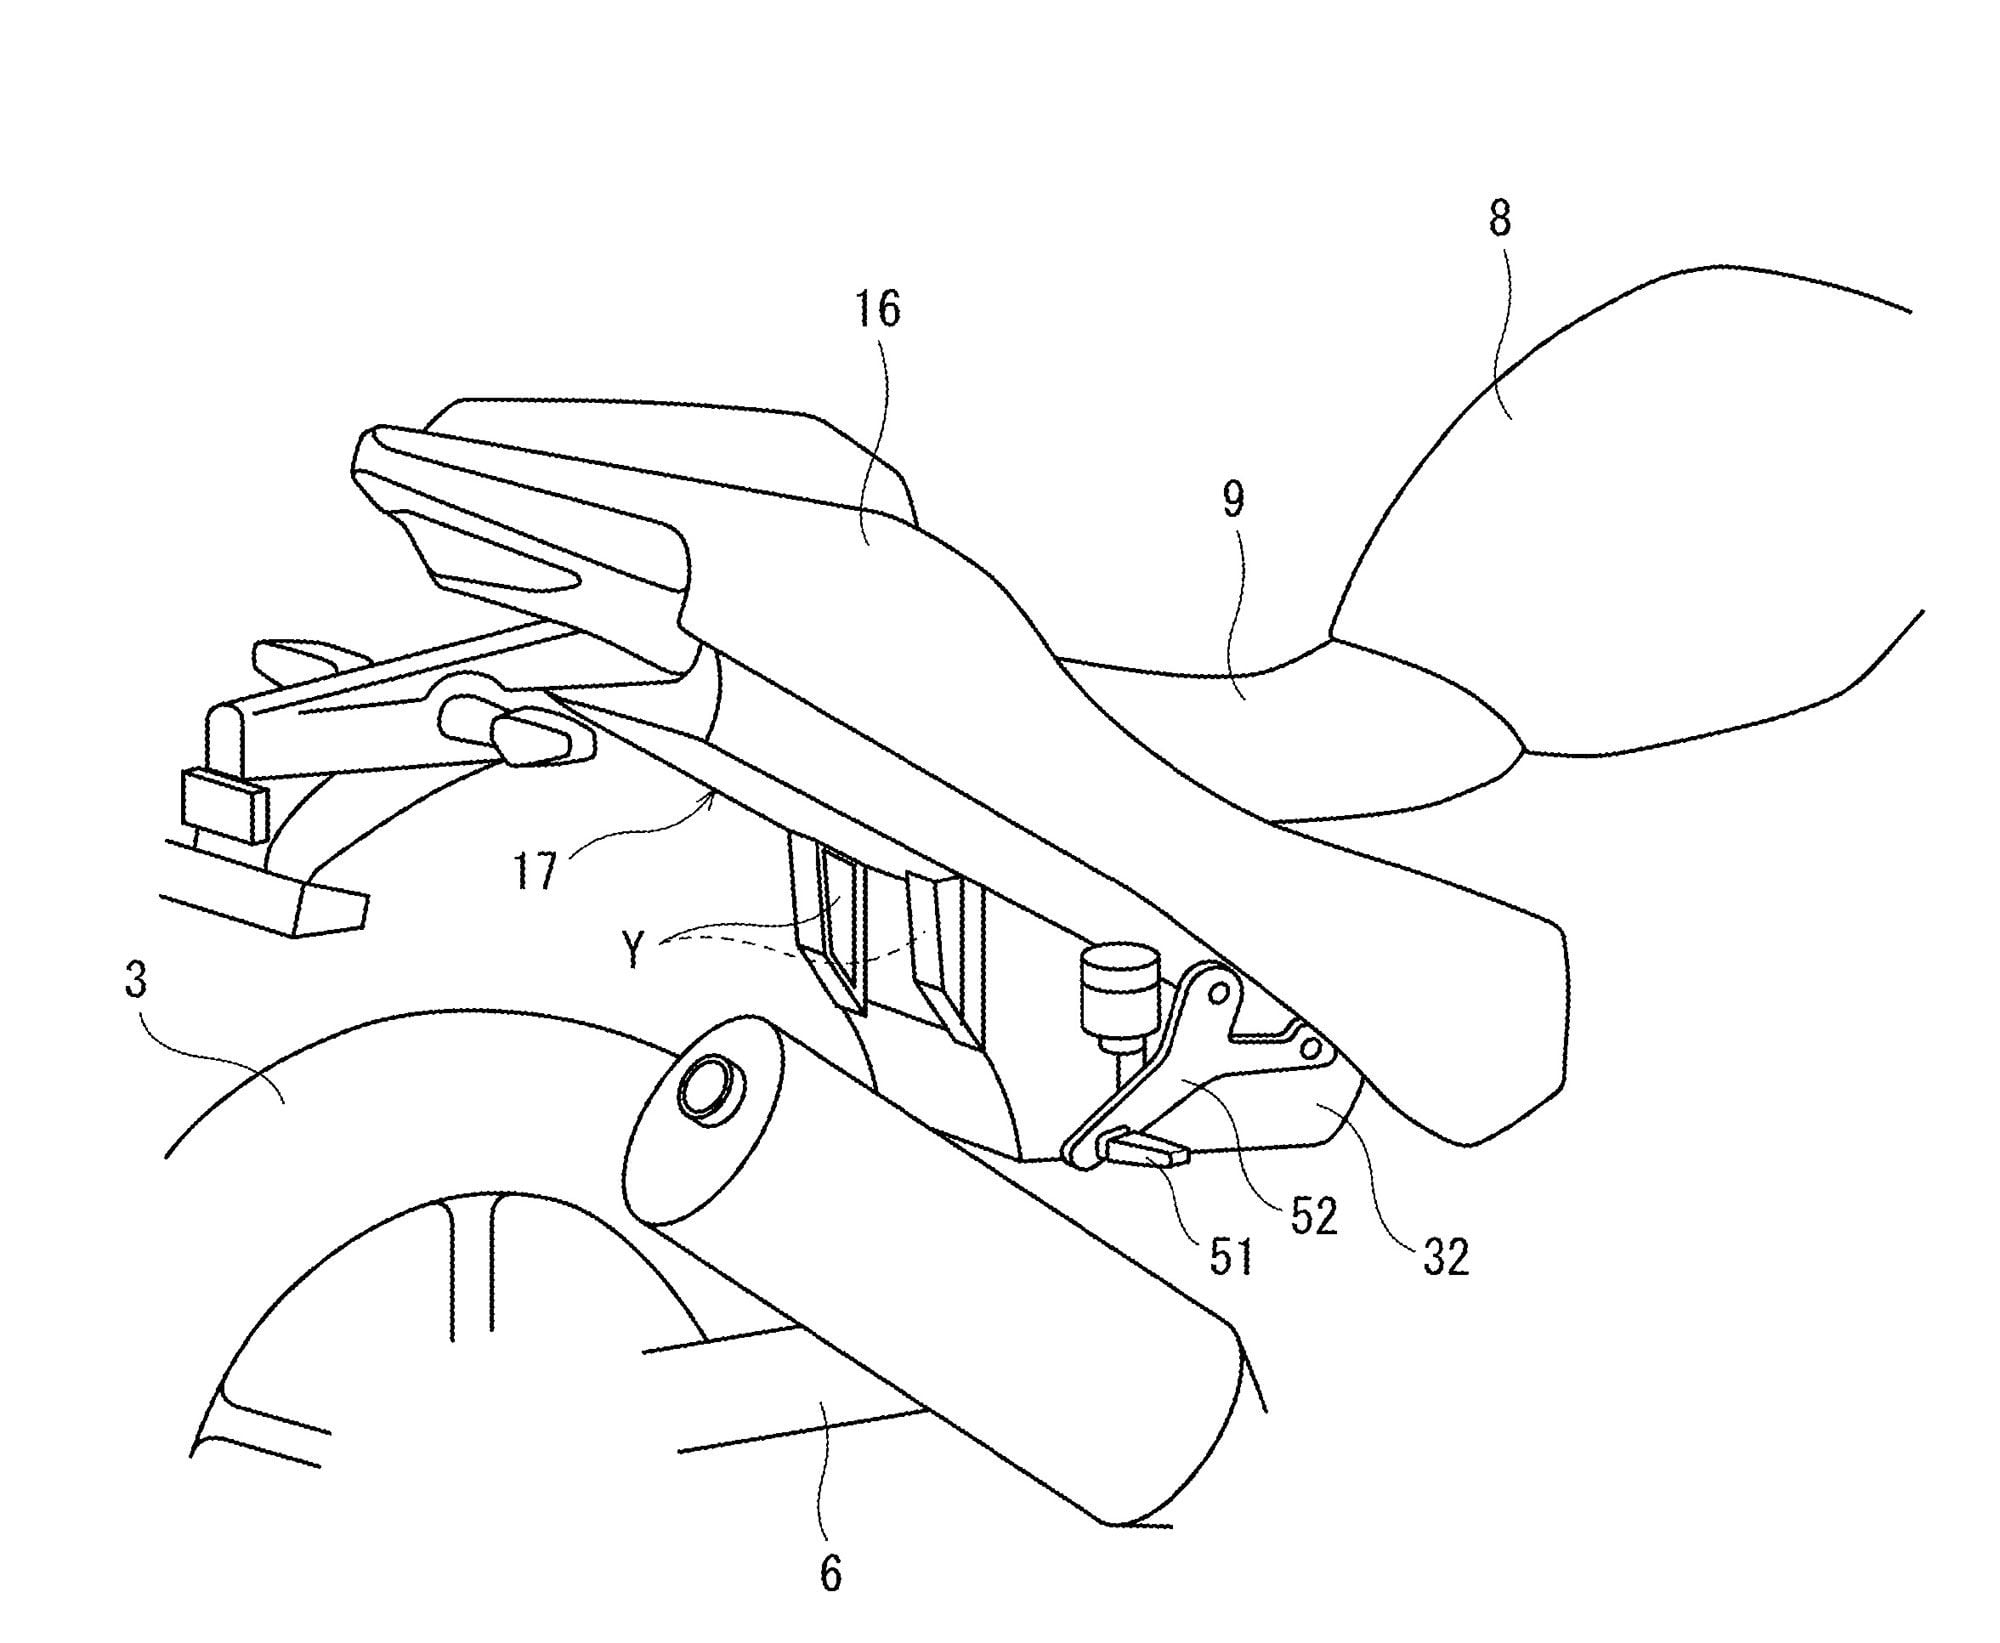 The latest patent involves cooling solutions for the underseat battery, which include exhaust ducts to draw heat out.